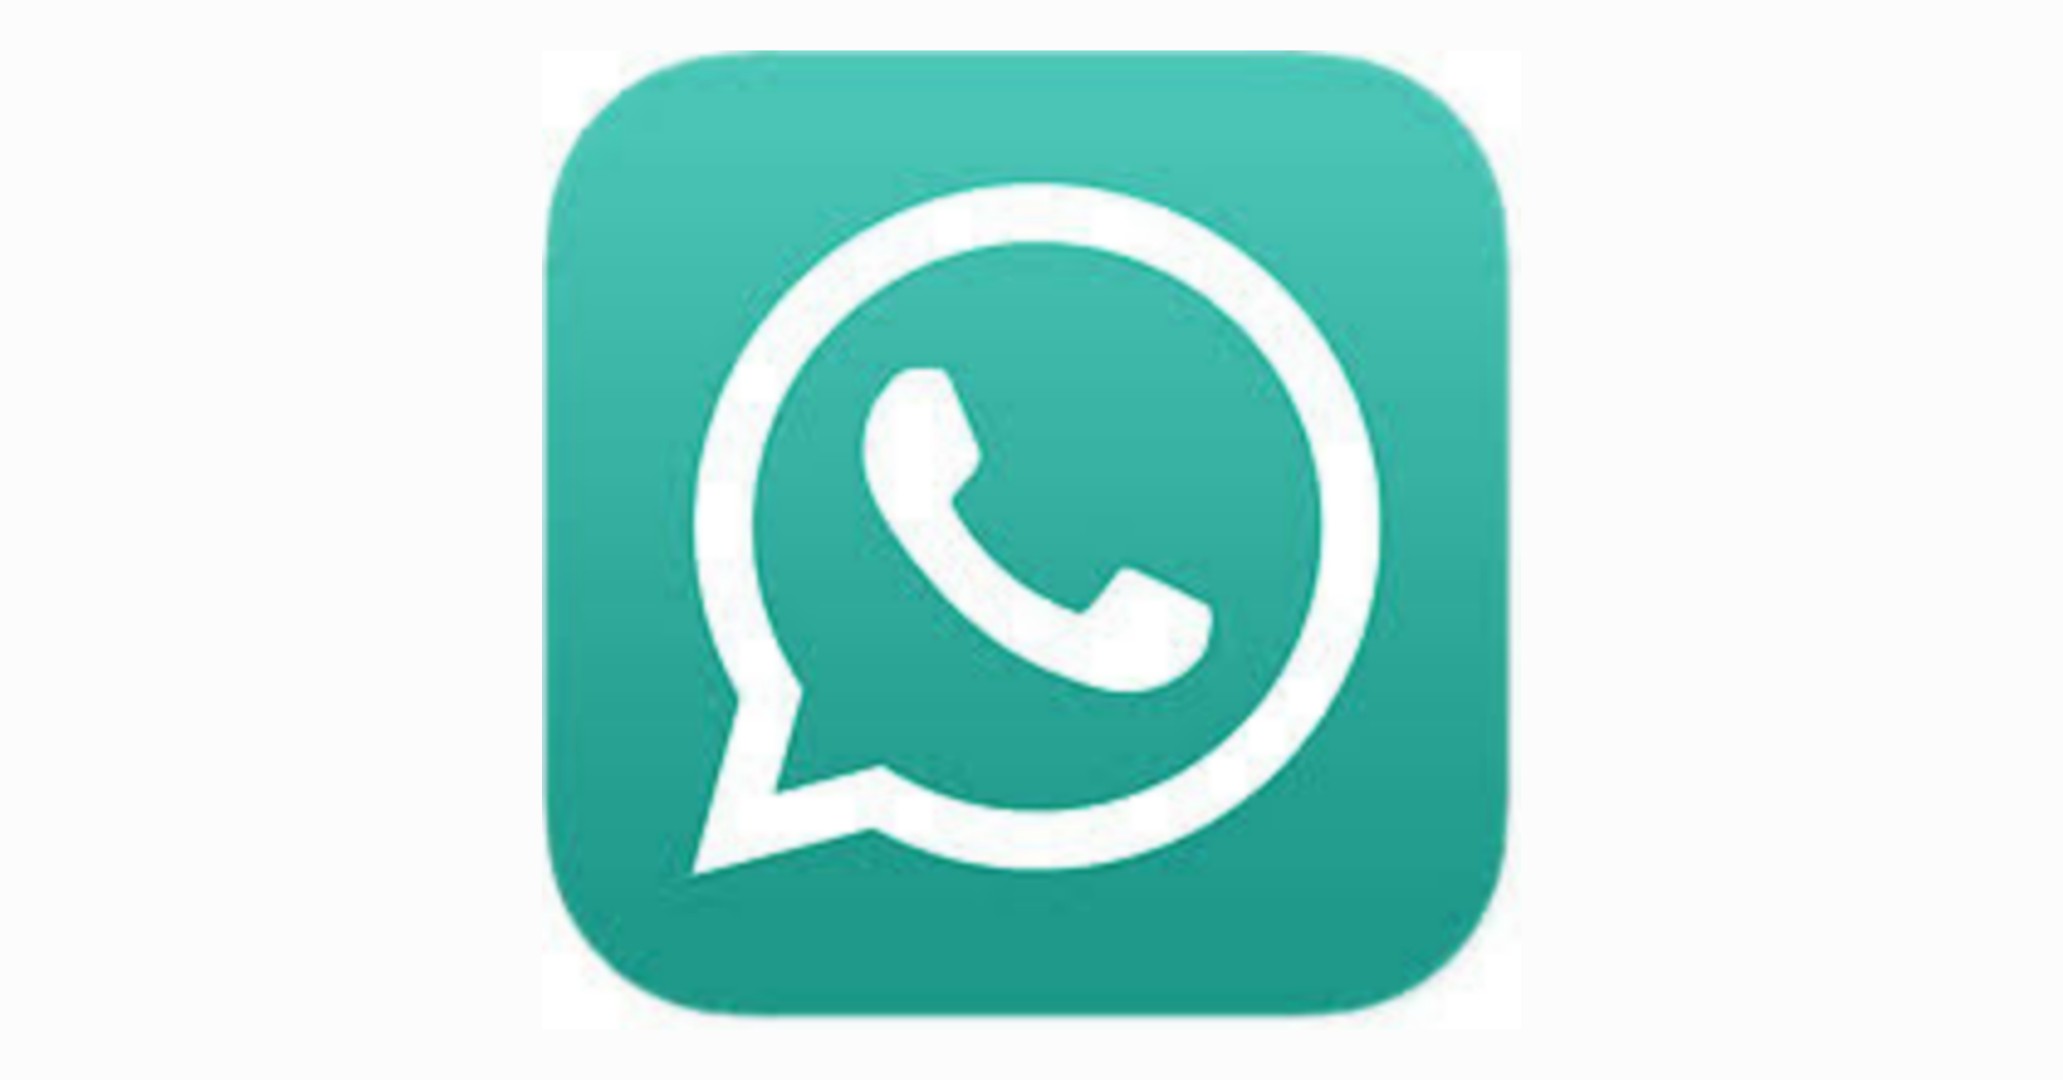 whatsapp for tablet free download apk